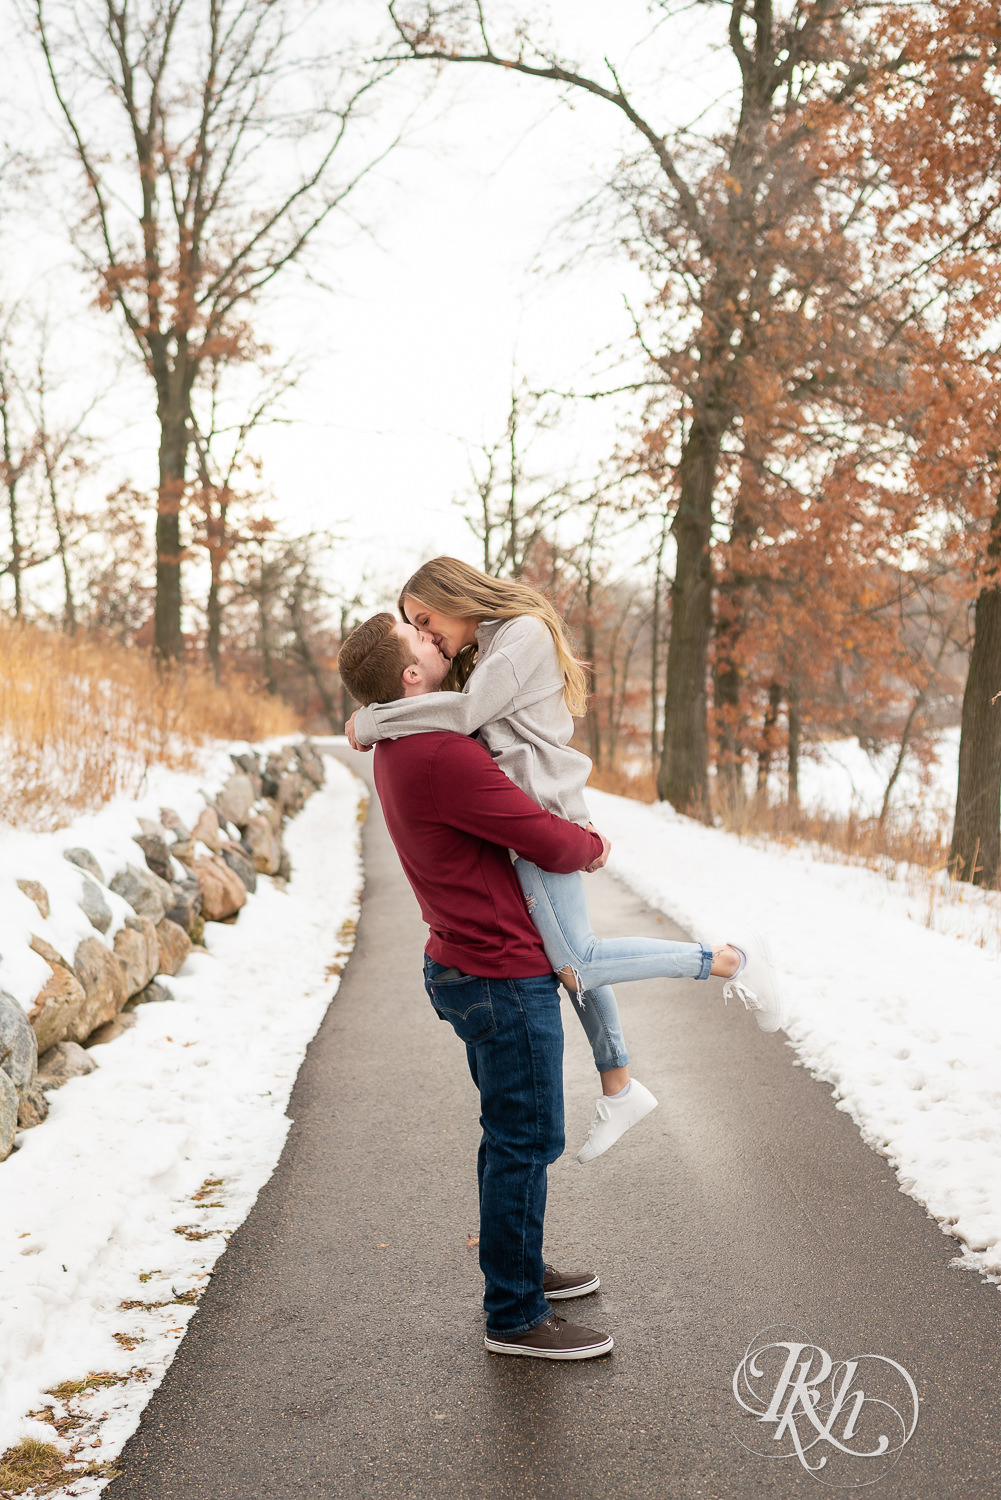 Man lifts and kisses woman in winter engagement photo at Lebanon Hills Regional Park in Eagan, Minnesota